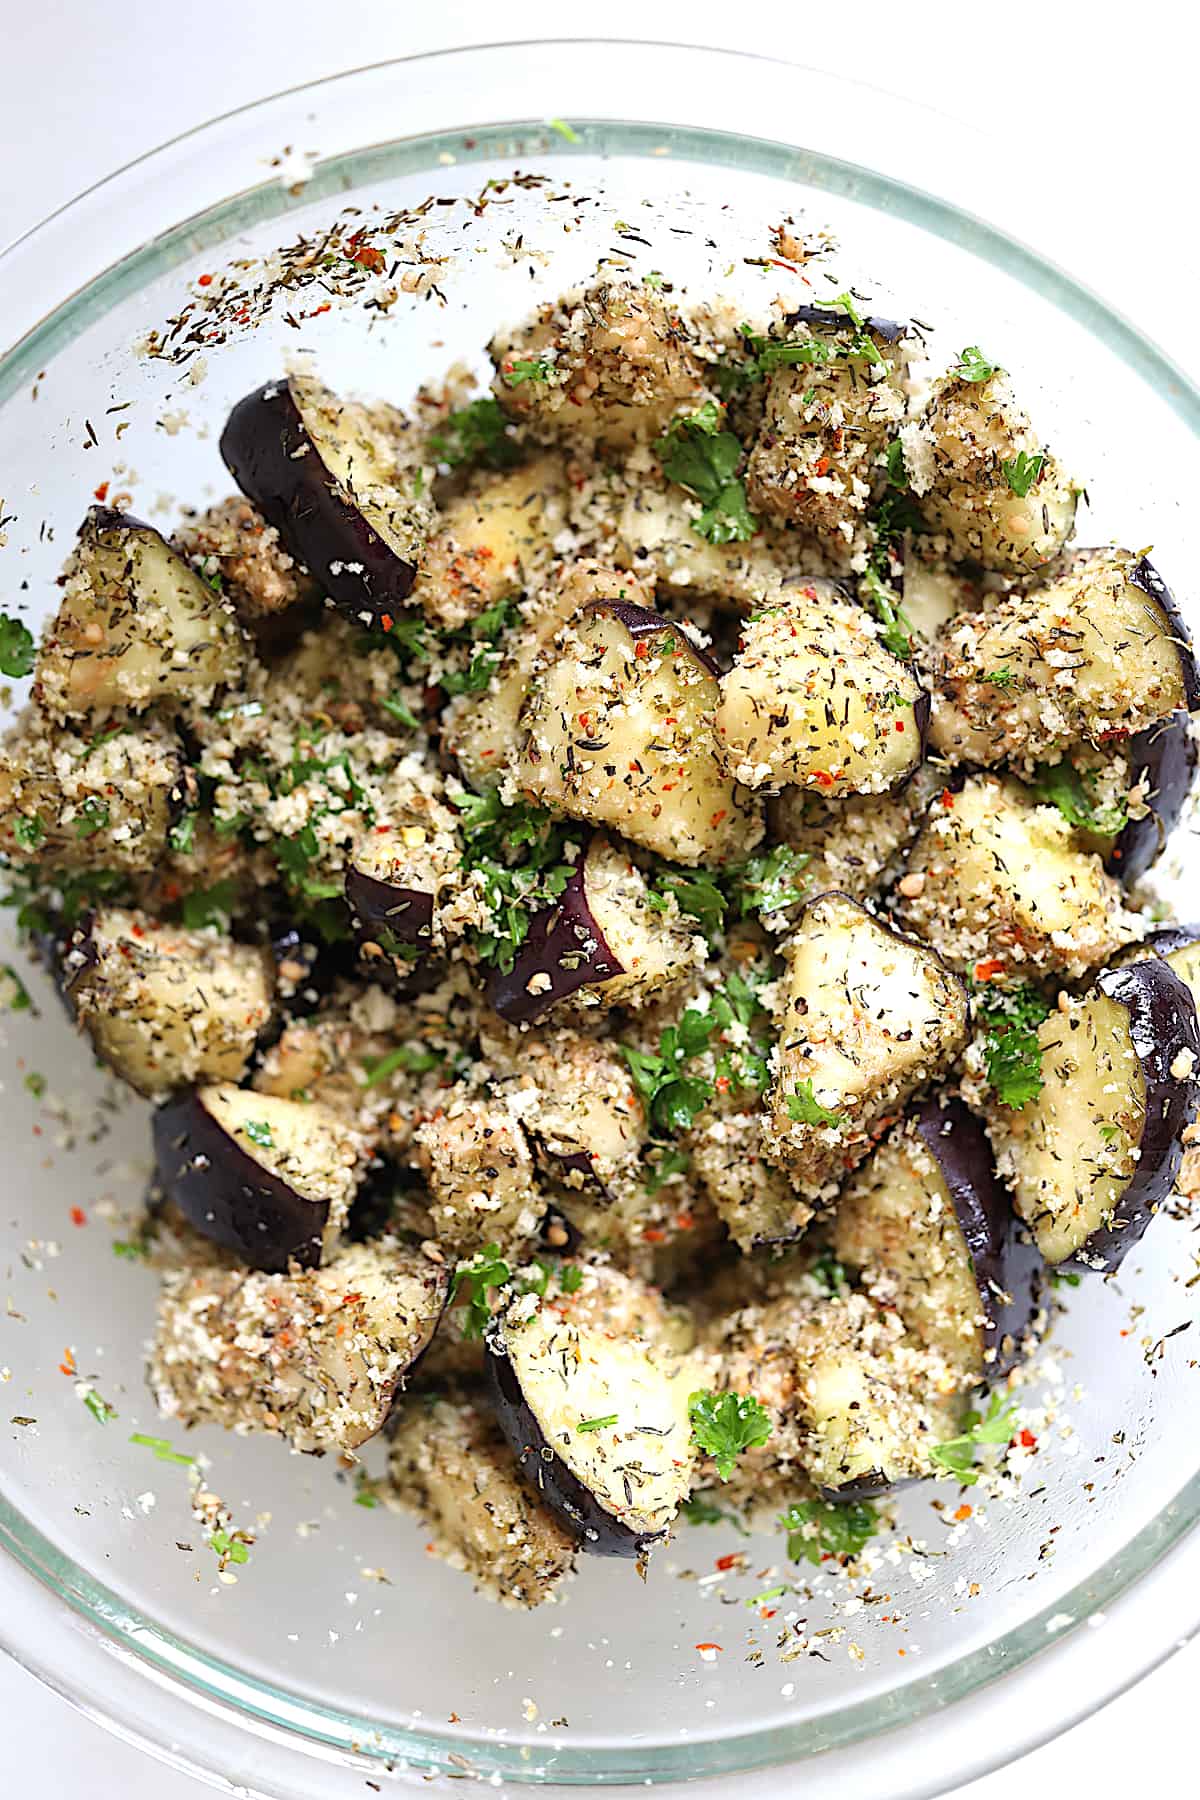 eggplant pieces in a mixing bowl tossed with herbs, oil and spices